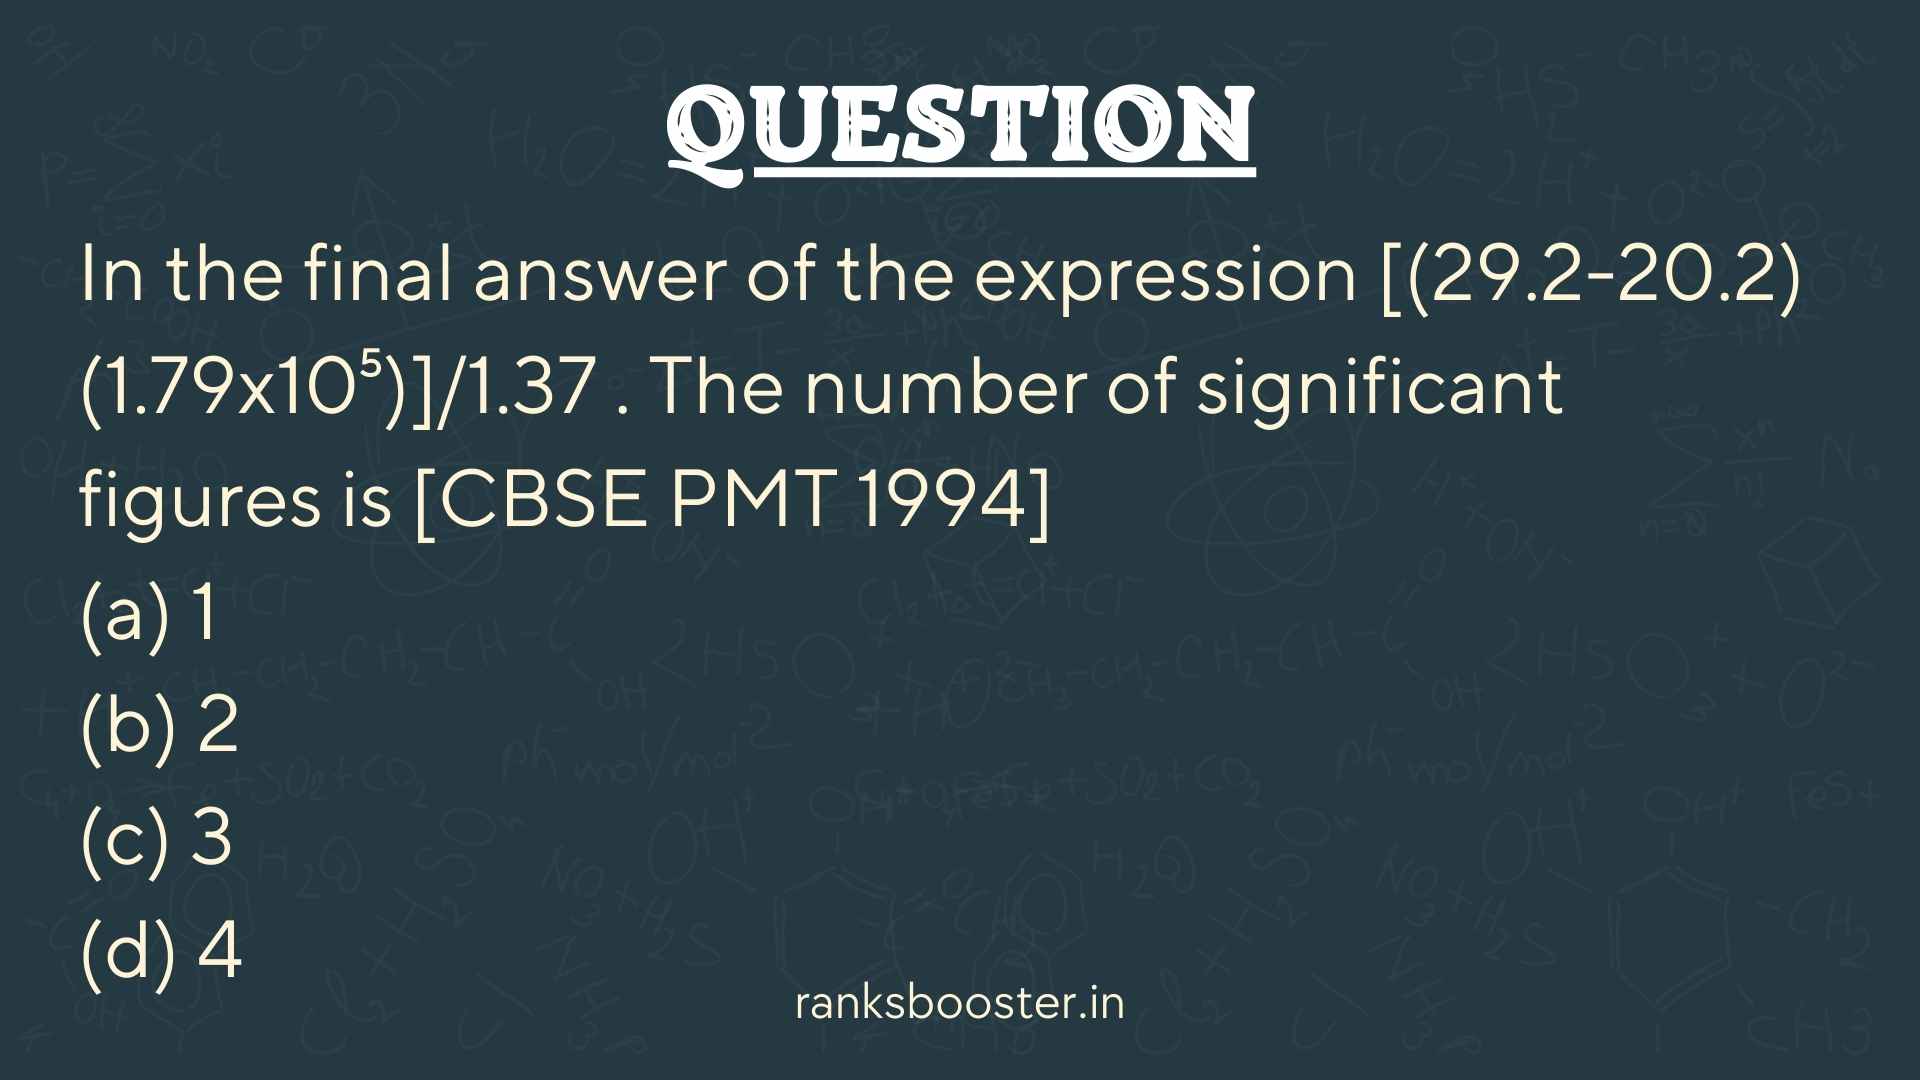 Question: In the final answer of the expression [(29.2-20.2)(1.79x10⁵)]/1.37 . The number of significant figures is [CBSE PMT 1994] (a) 1 (b) 2 (c) 3 (d) 4